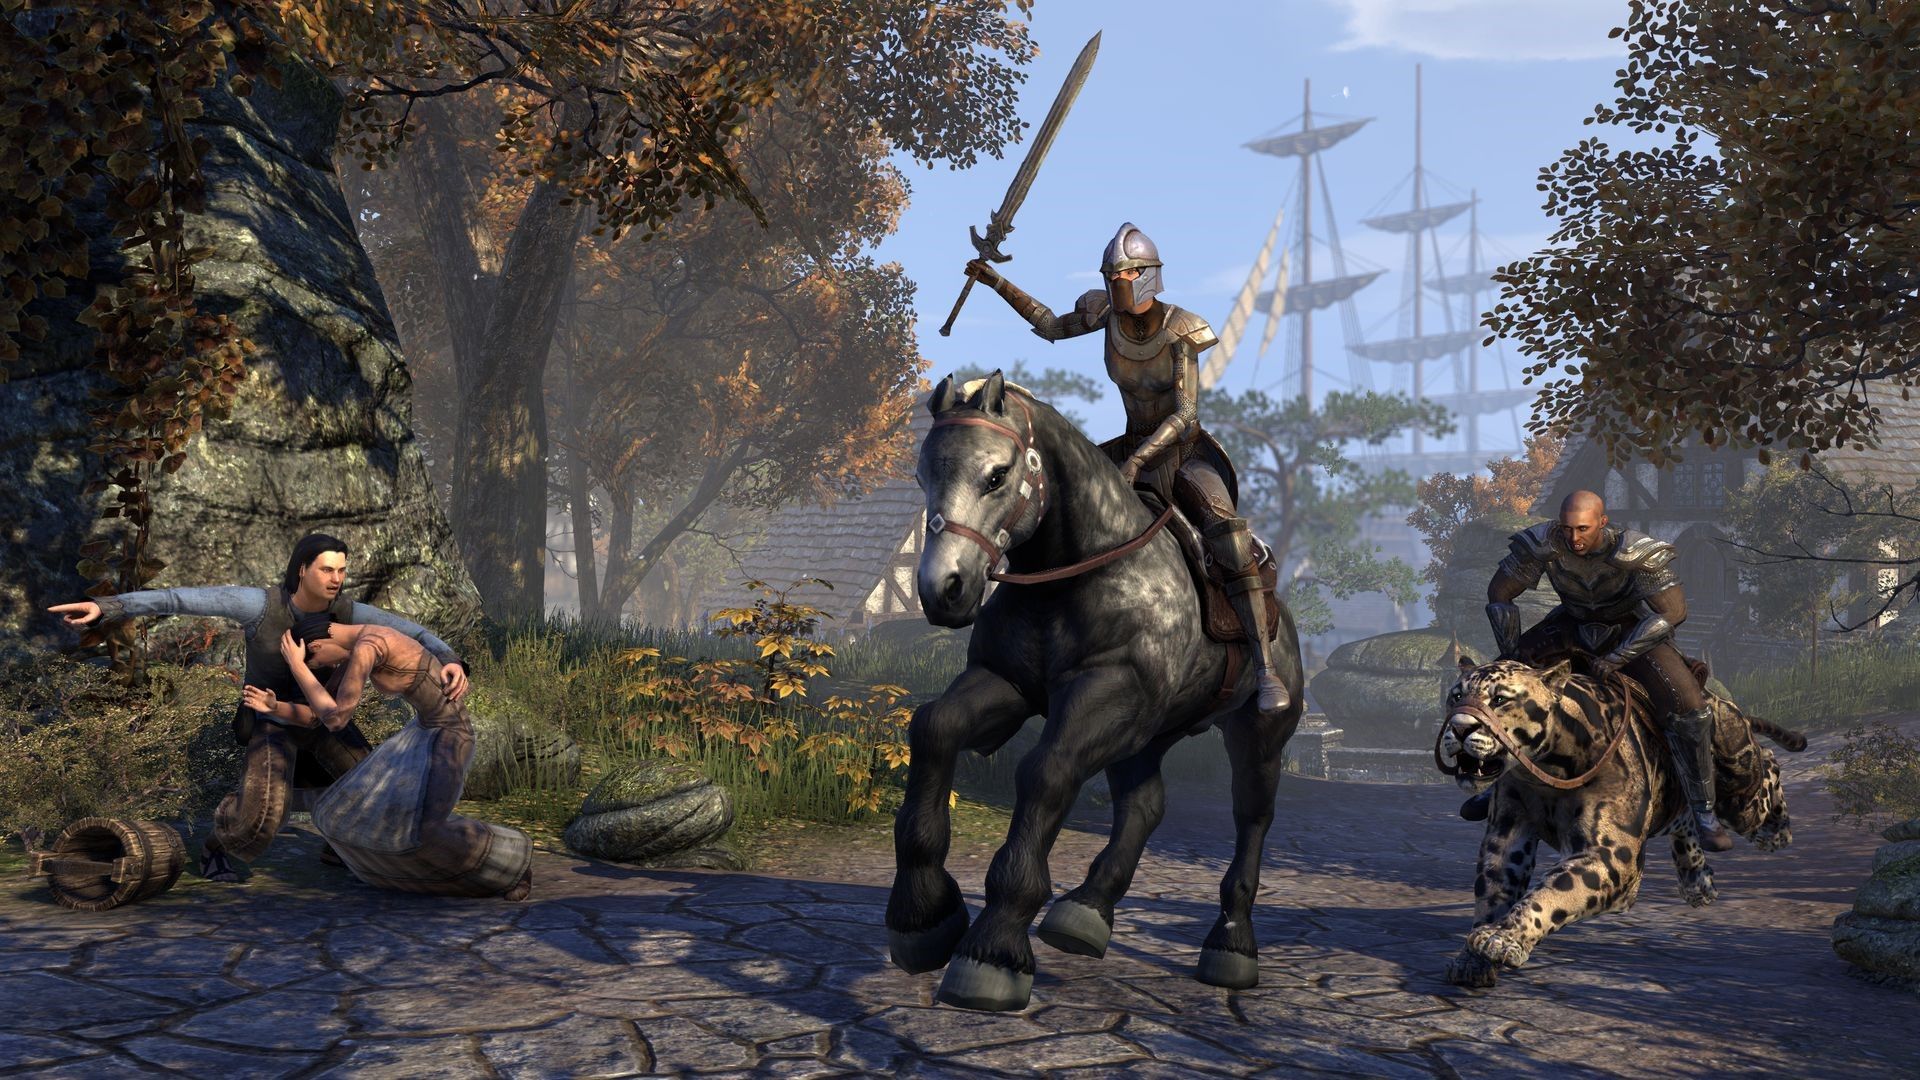 Check Out The Elder Scrolls Online Free Trial & New Dragonhold DLC